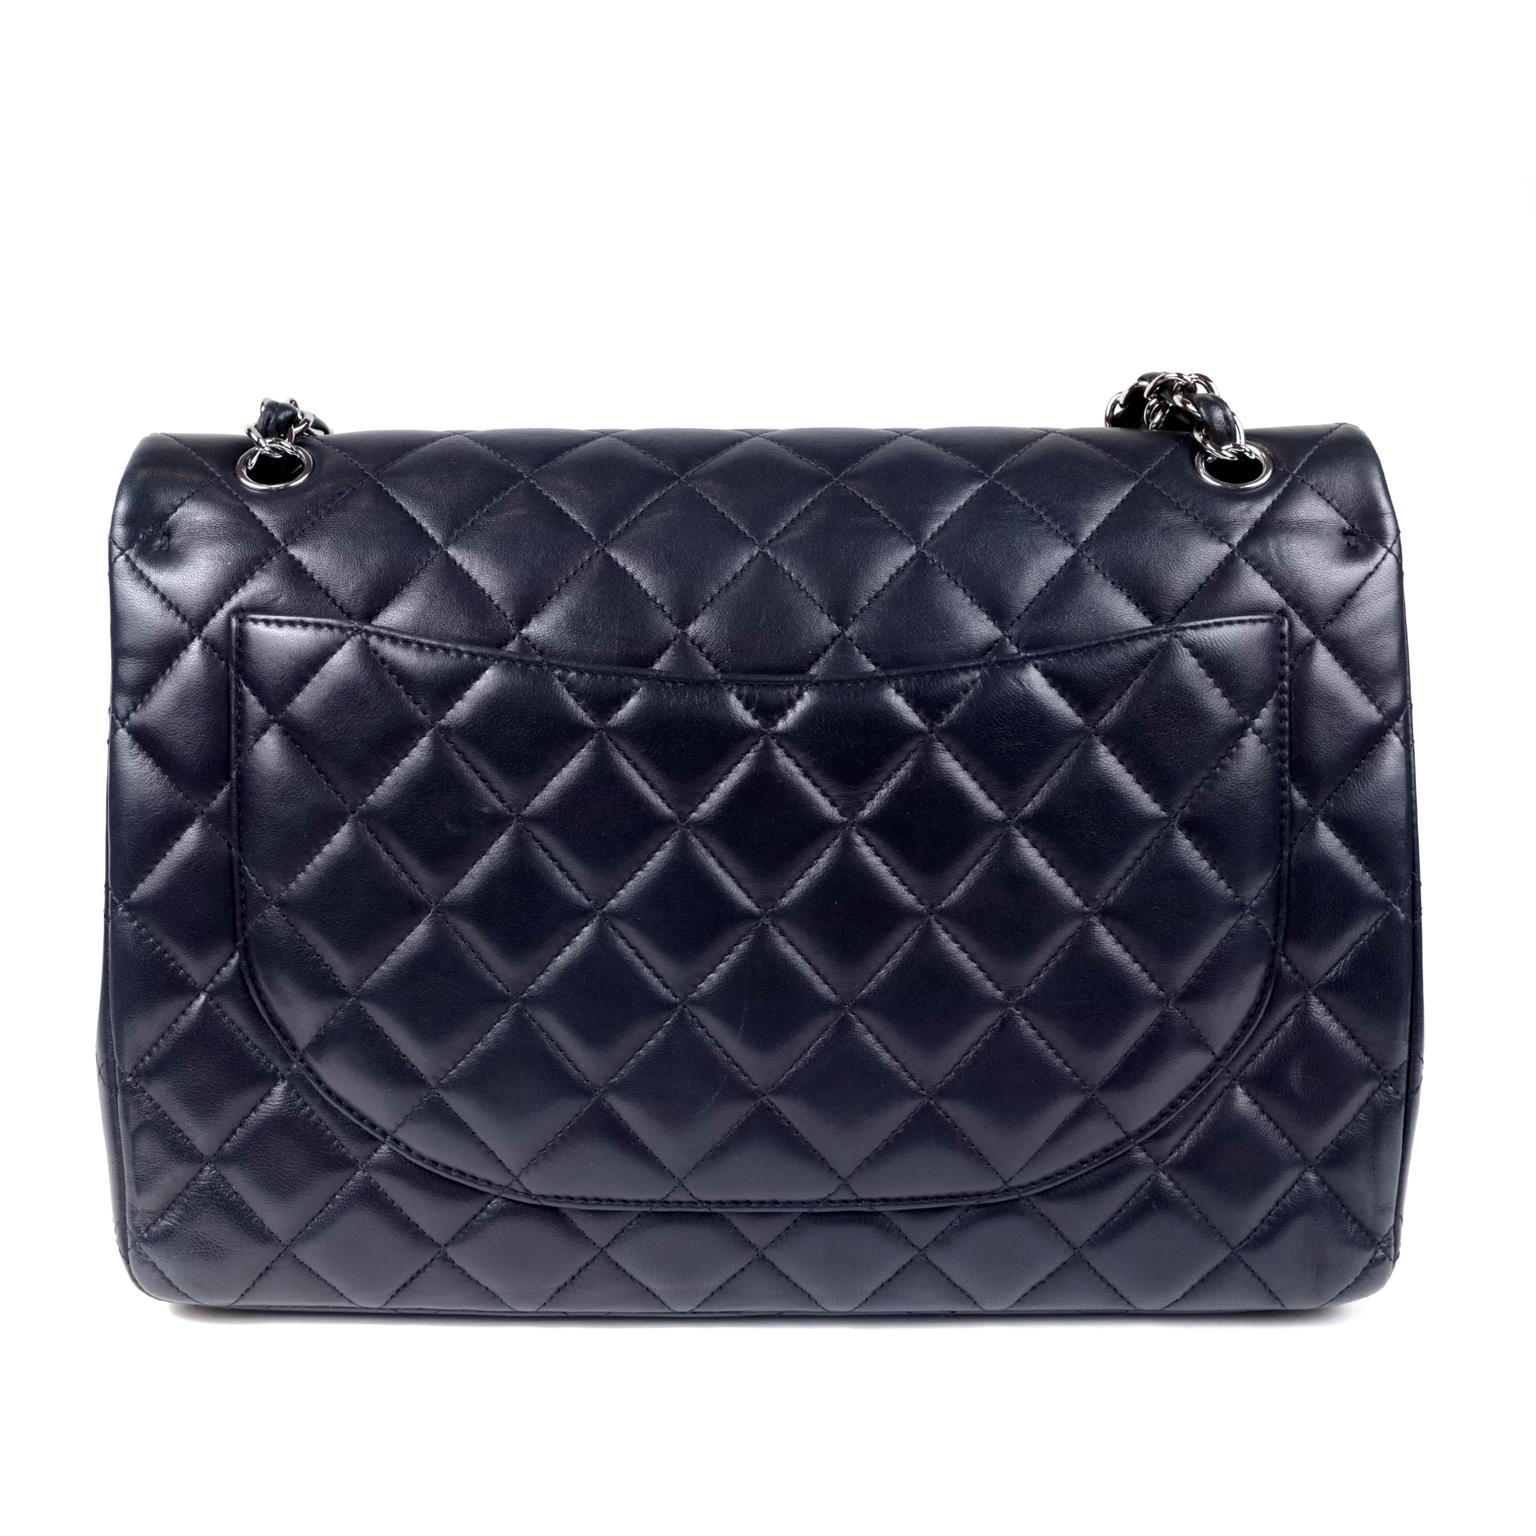 Chanel Navy Lambskin Maxi Classic Double Flap Bag- PRISTINE; Never Before Carried
 Perfectly timeless, navy leather paired with silver hardware in the maxi size is a great addition to any sophisticated wardrobe.  
Rich navy lambskin leather is